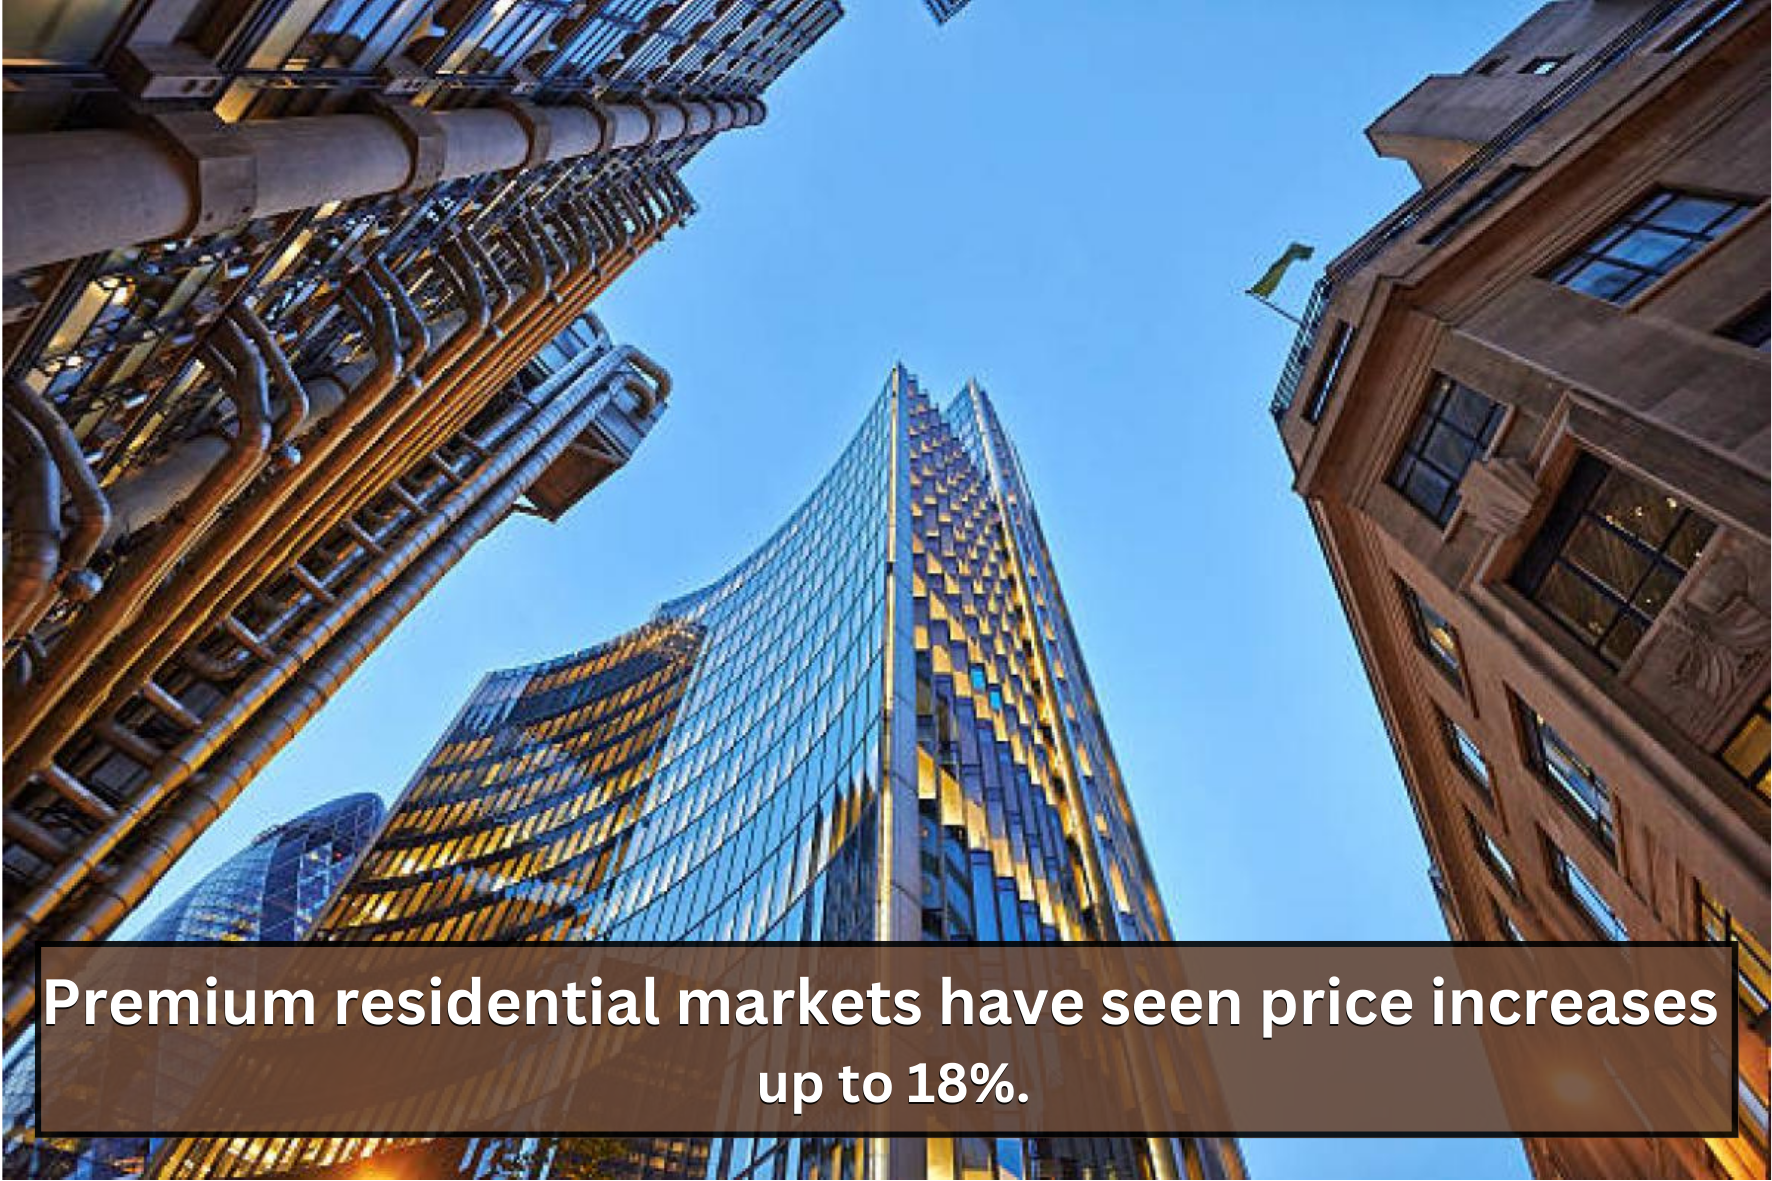 uploads/blog/Premium_residential_markets_have_seen_price_increases_of_up_to-18-precent.png